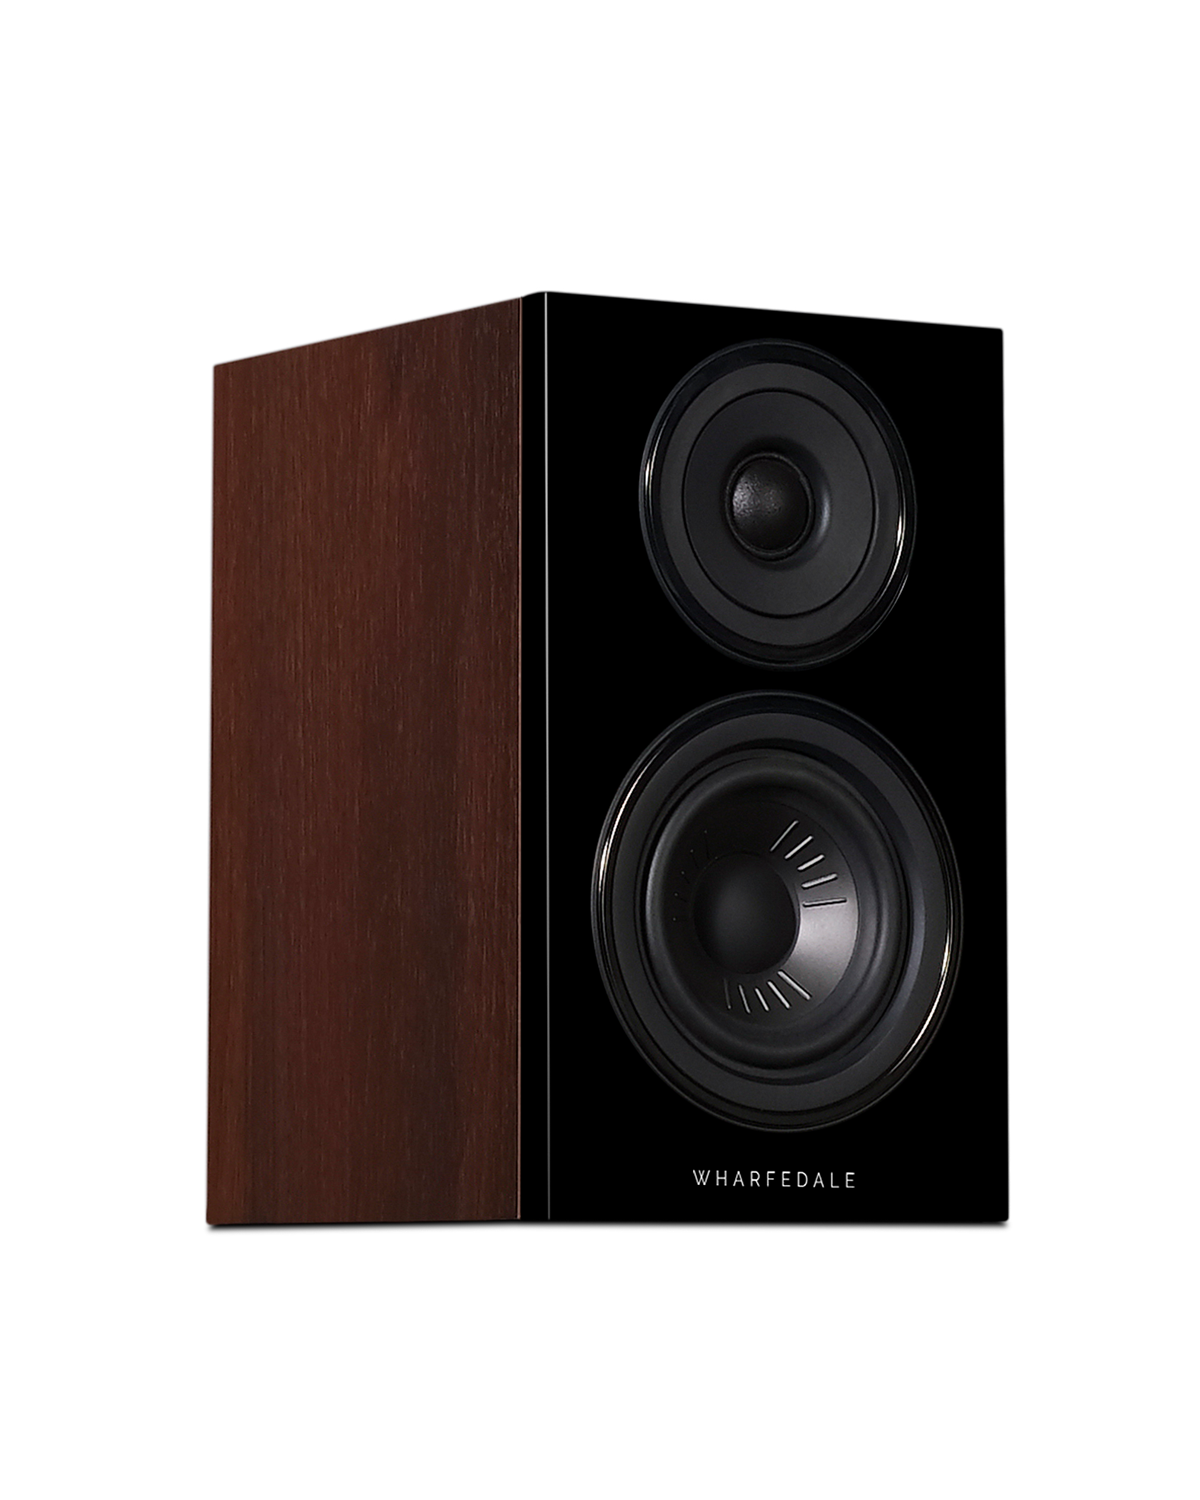 The ultra-compact speaker in the DIAMOND 12 series, the DIAMOND 12.0 features all of the same technology as its larger siblings but is designed for small-footprint hi-fi systems, or even as a high-performance, compact satellite speaker in home theatre systems. 